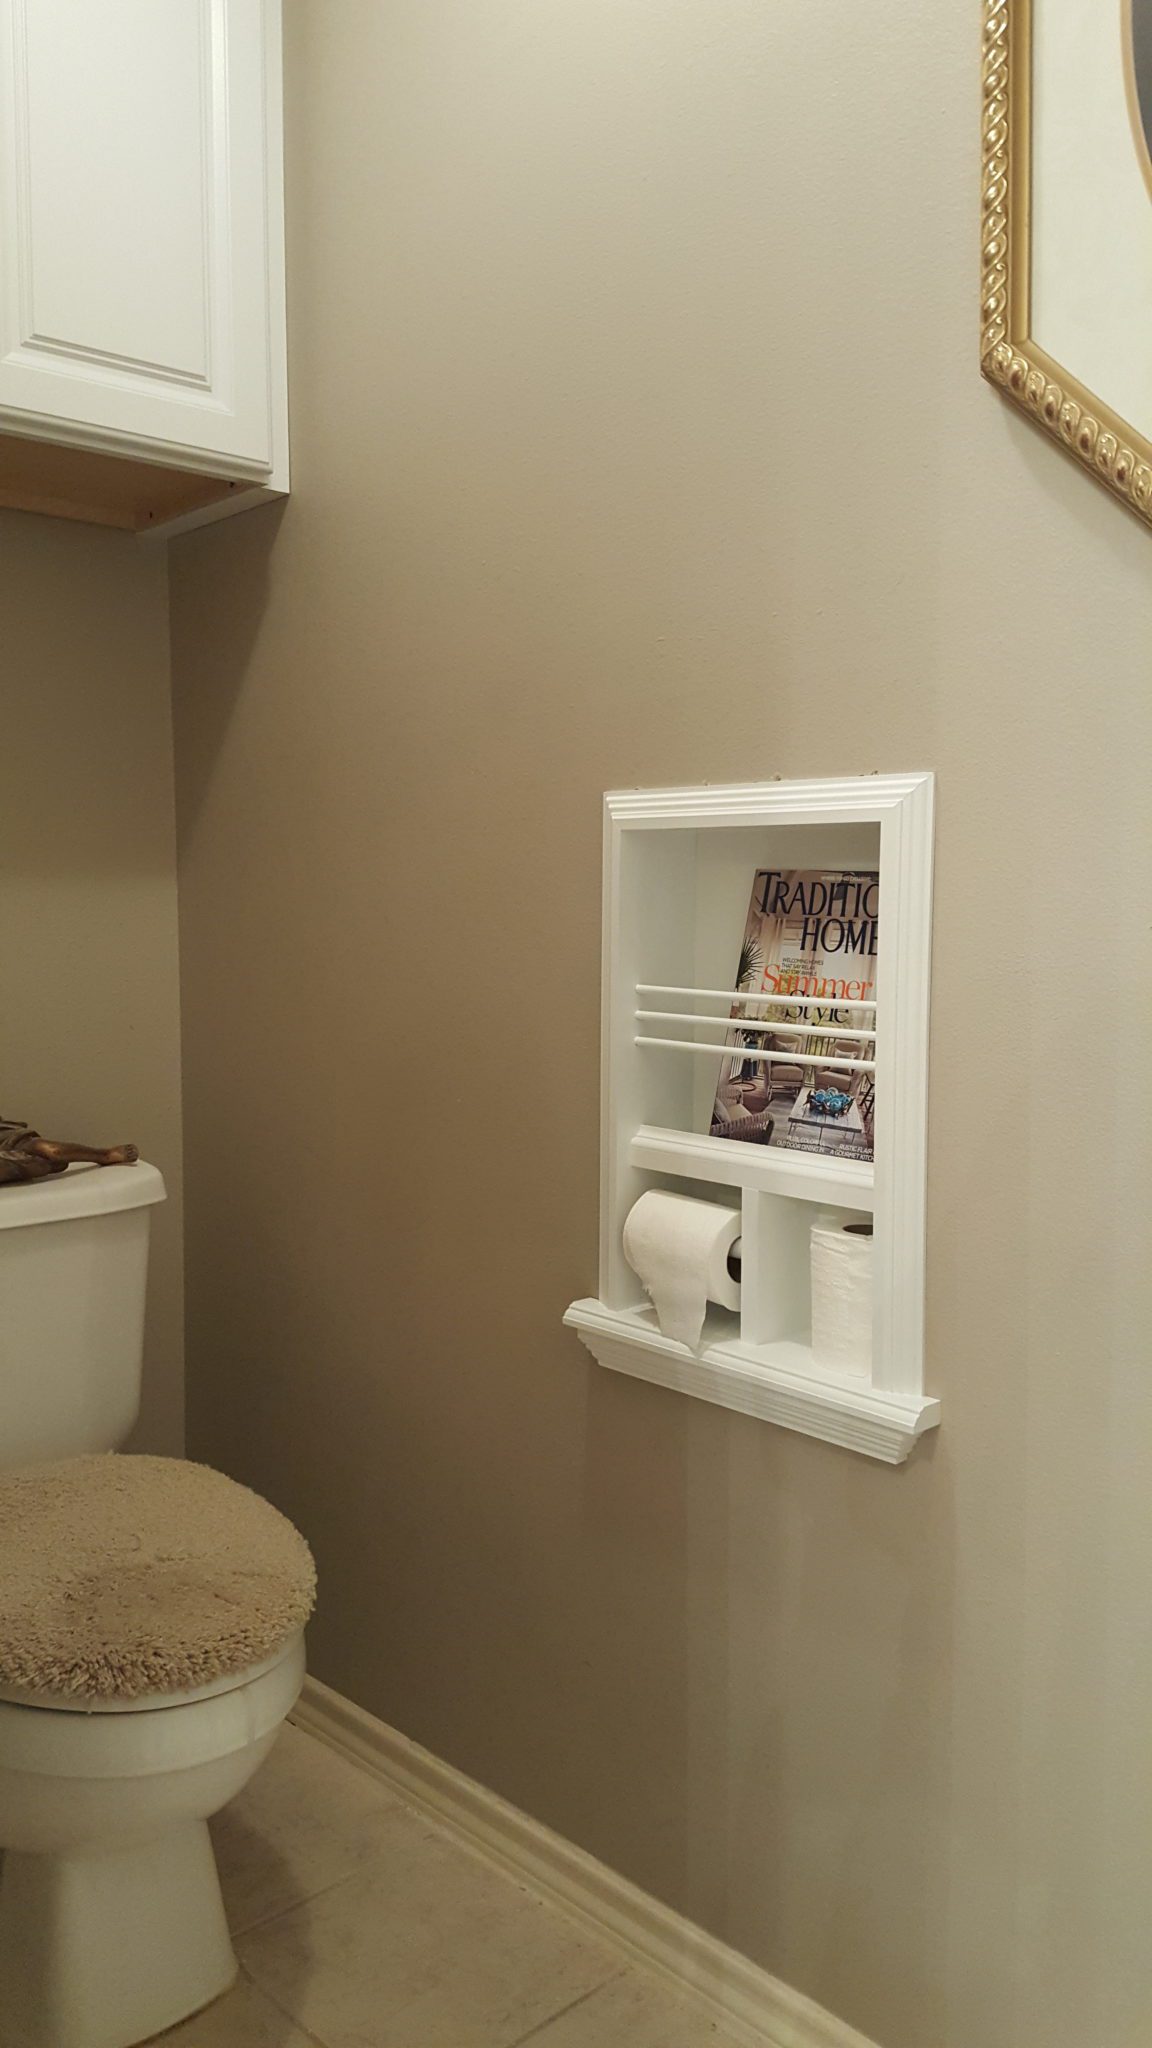 https://www.wgwoodproducts.com/wp-content/uploads/2020/05/Magazine-and-Toilet-Roll-Combo-scaled.jpg